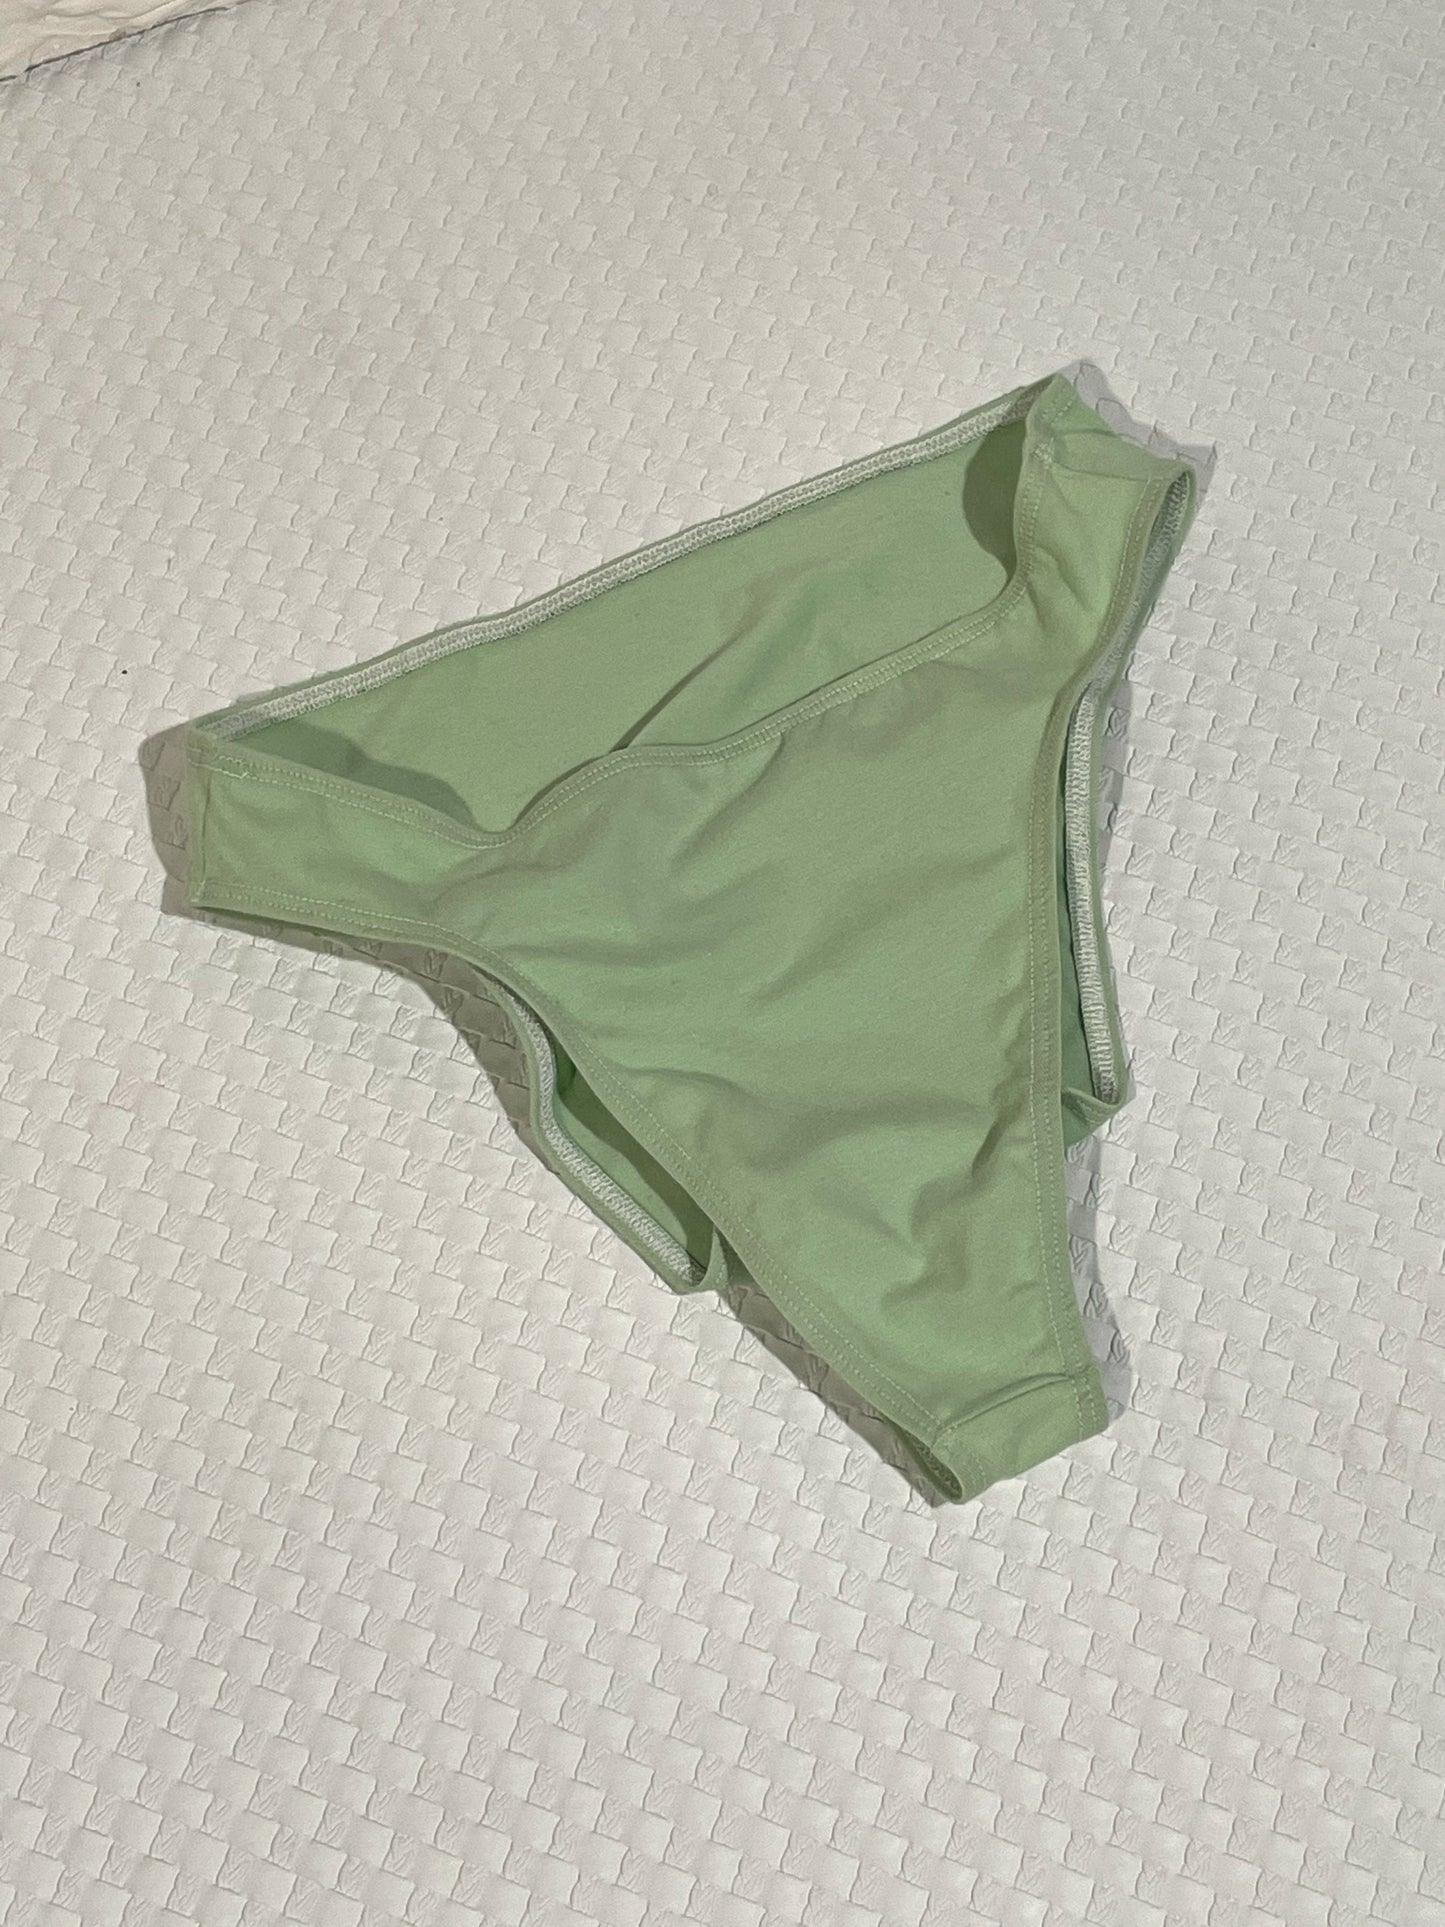 COTTON PANTY PACK - GREY, WHITE, LIME